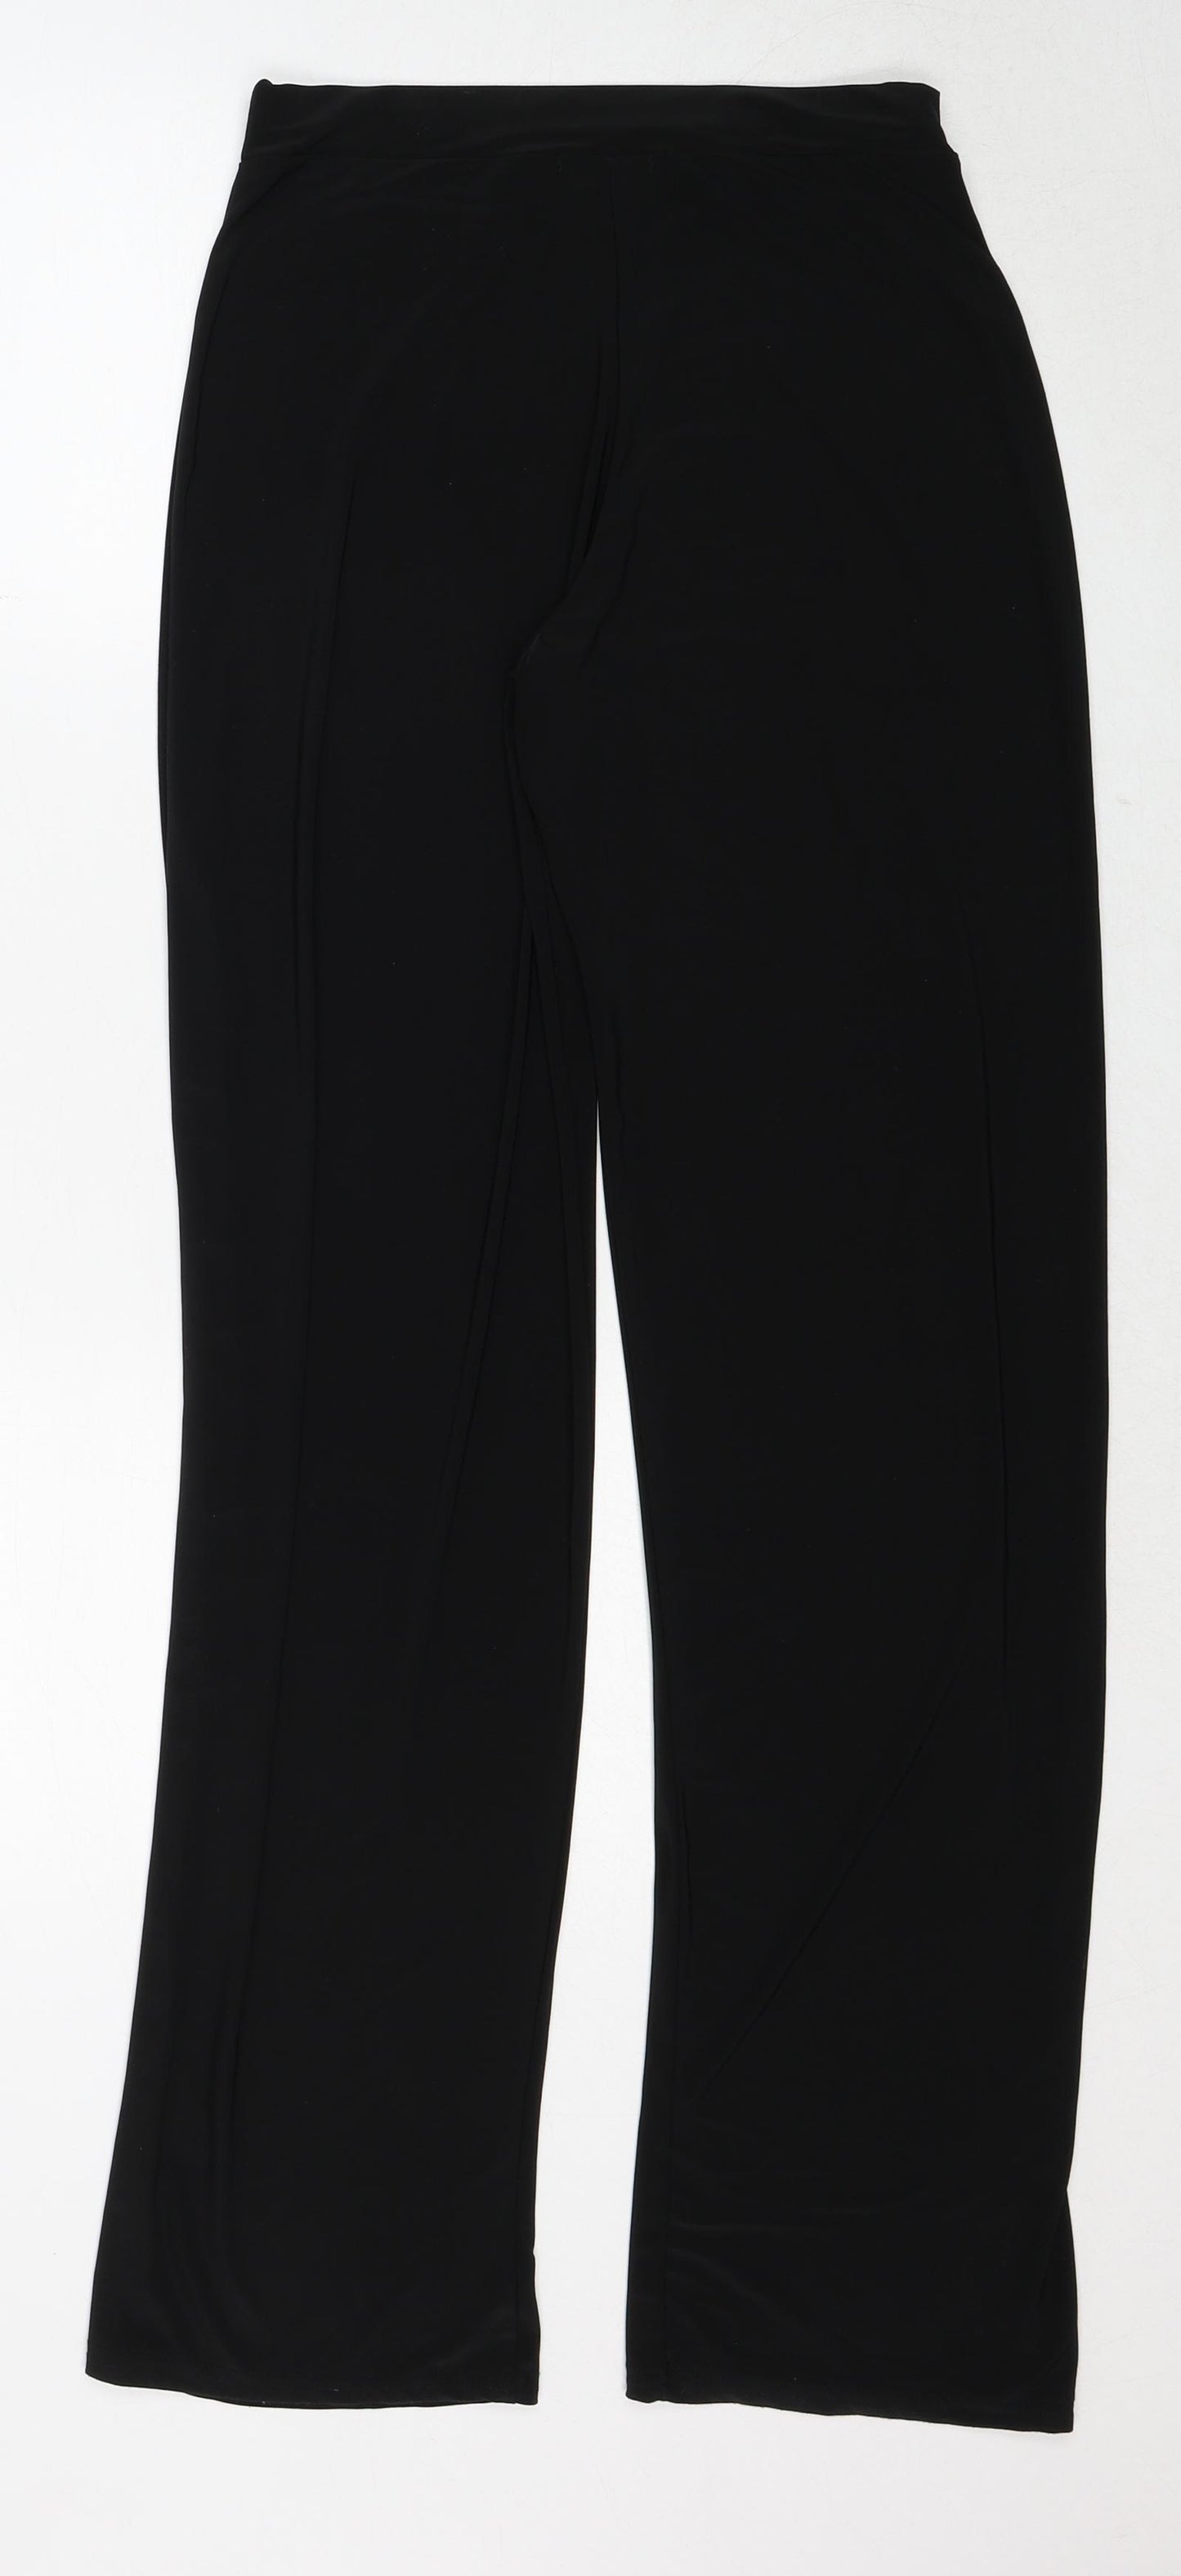 PRETTYLITTLETHING Womens Black Polyester Trousers Size 10 Regular